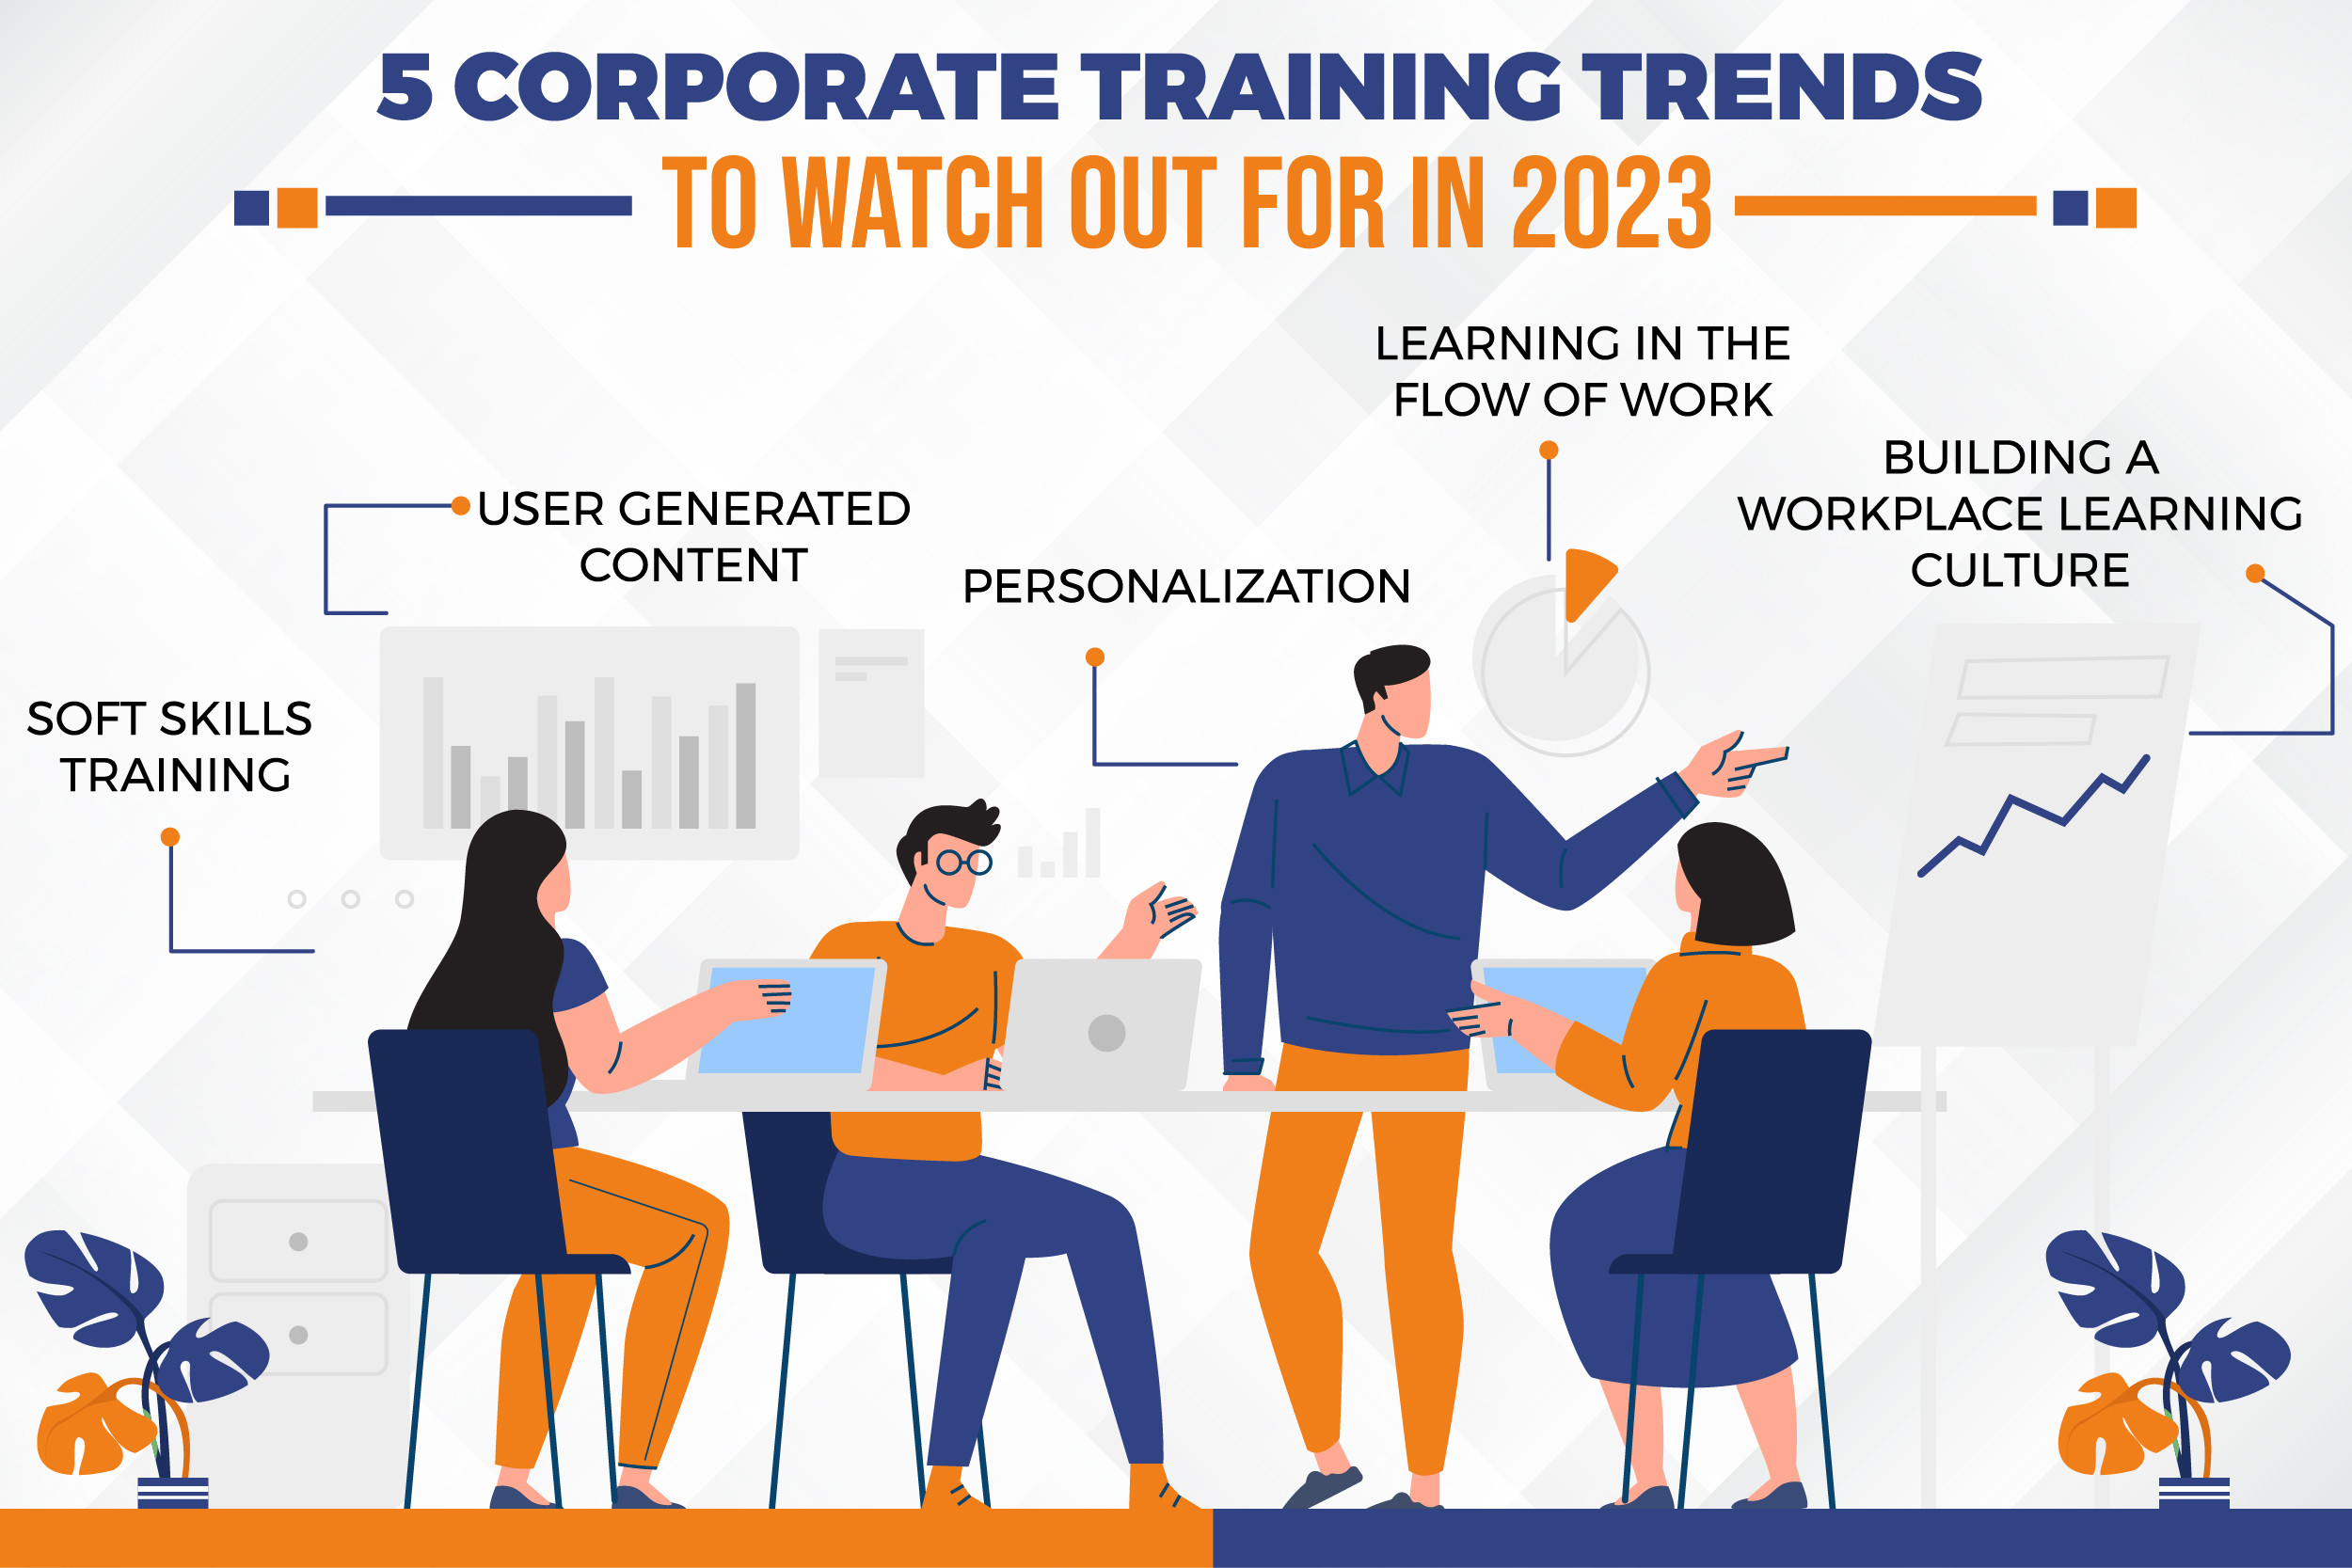 5 Corporate Training Trends To Watch Out For In 2023